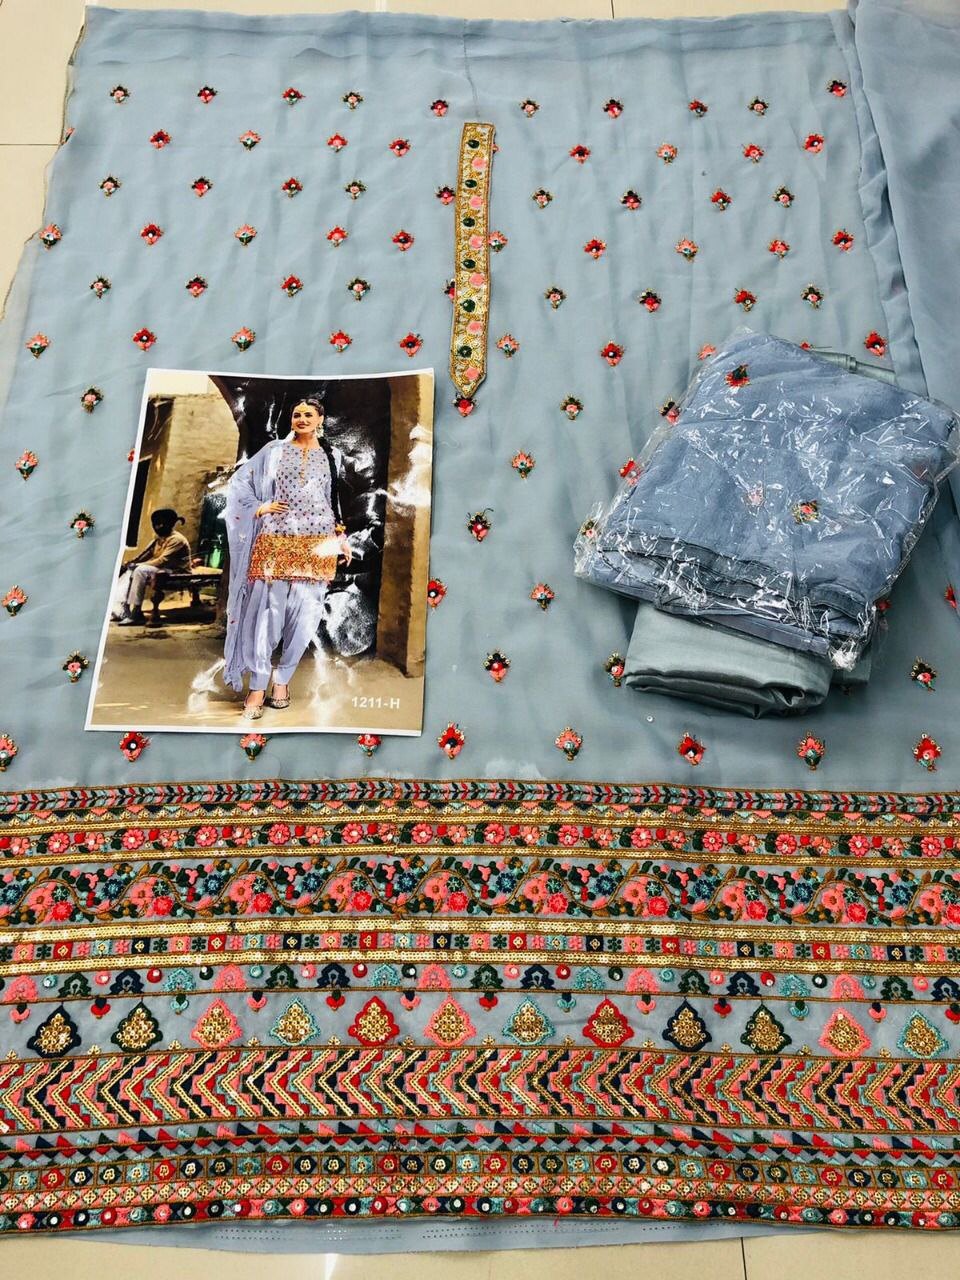 Light Blue Heavy Faux Georgette With Embroidery Work Patiyala Suit Designer Suits Shopindiapparels.com 